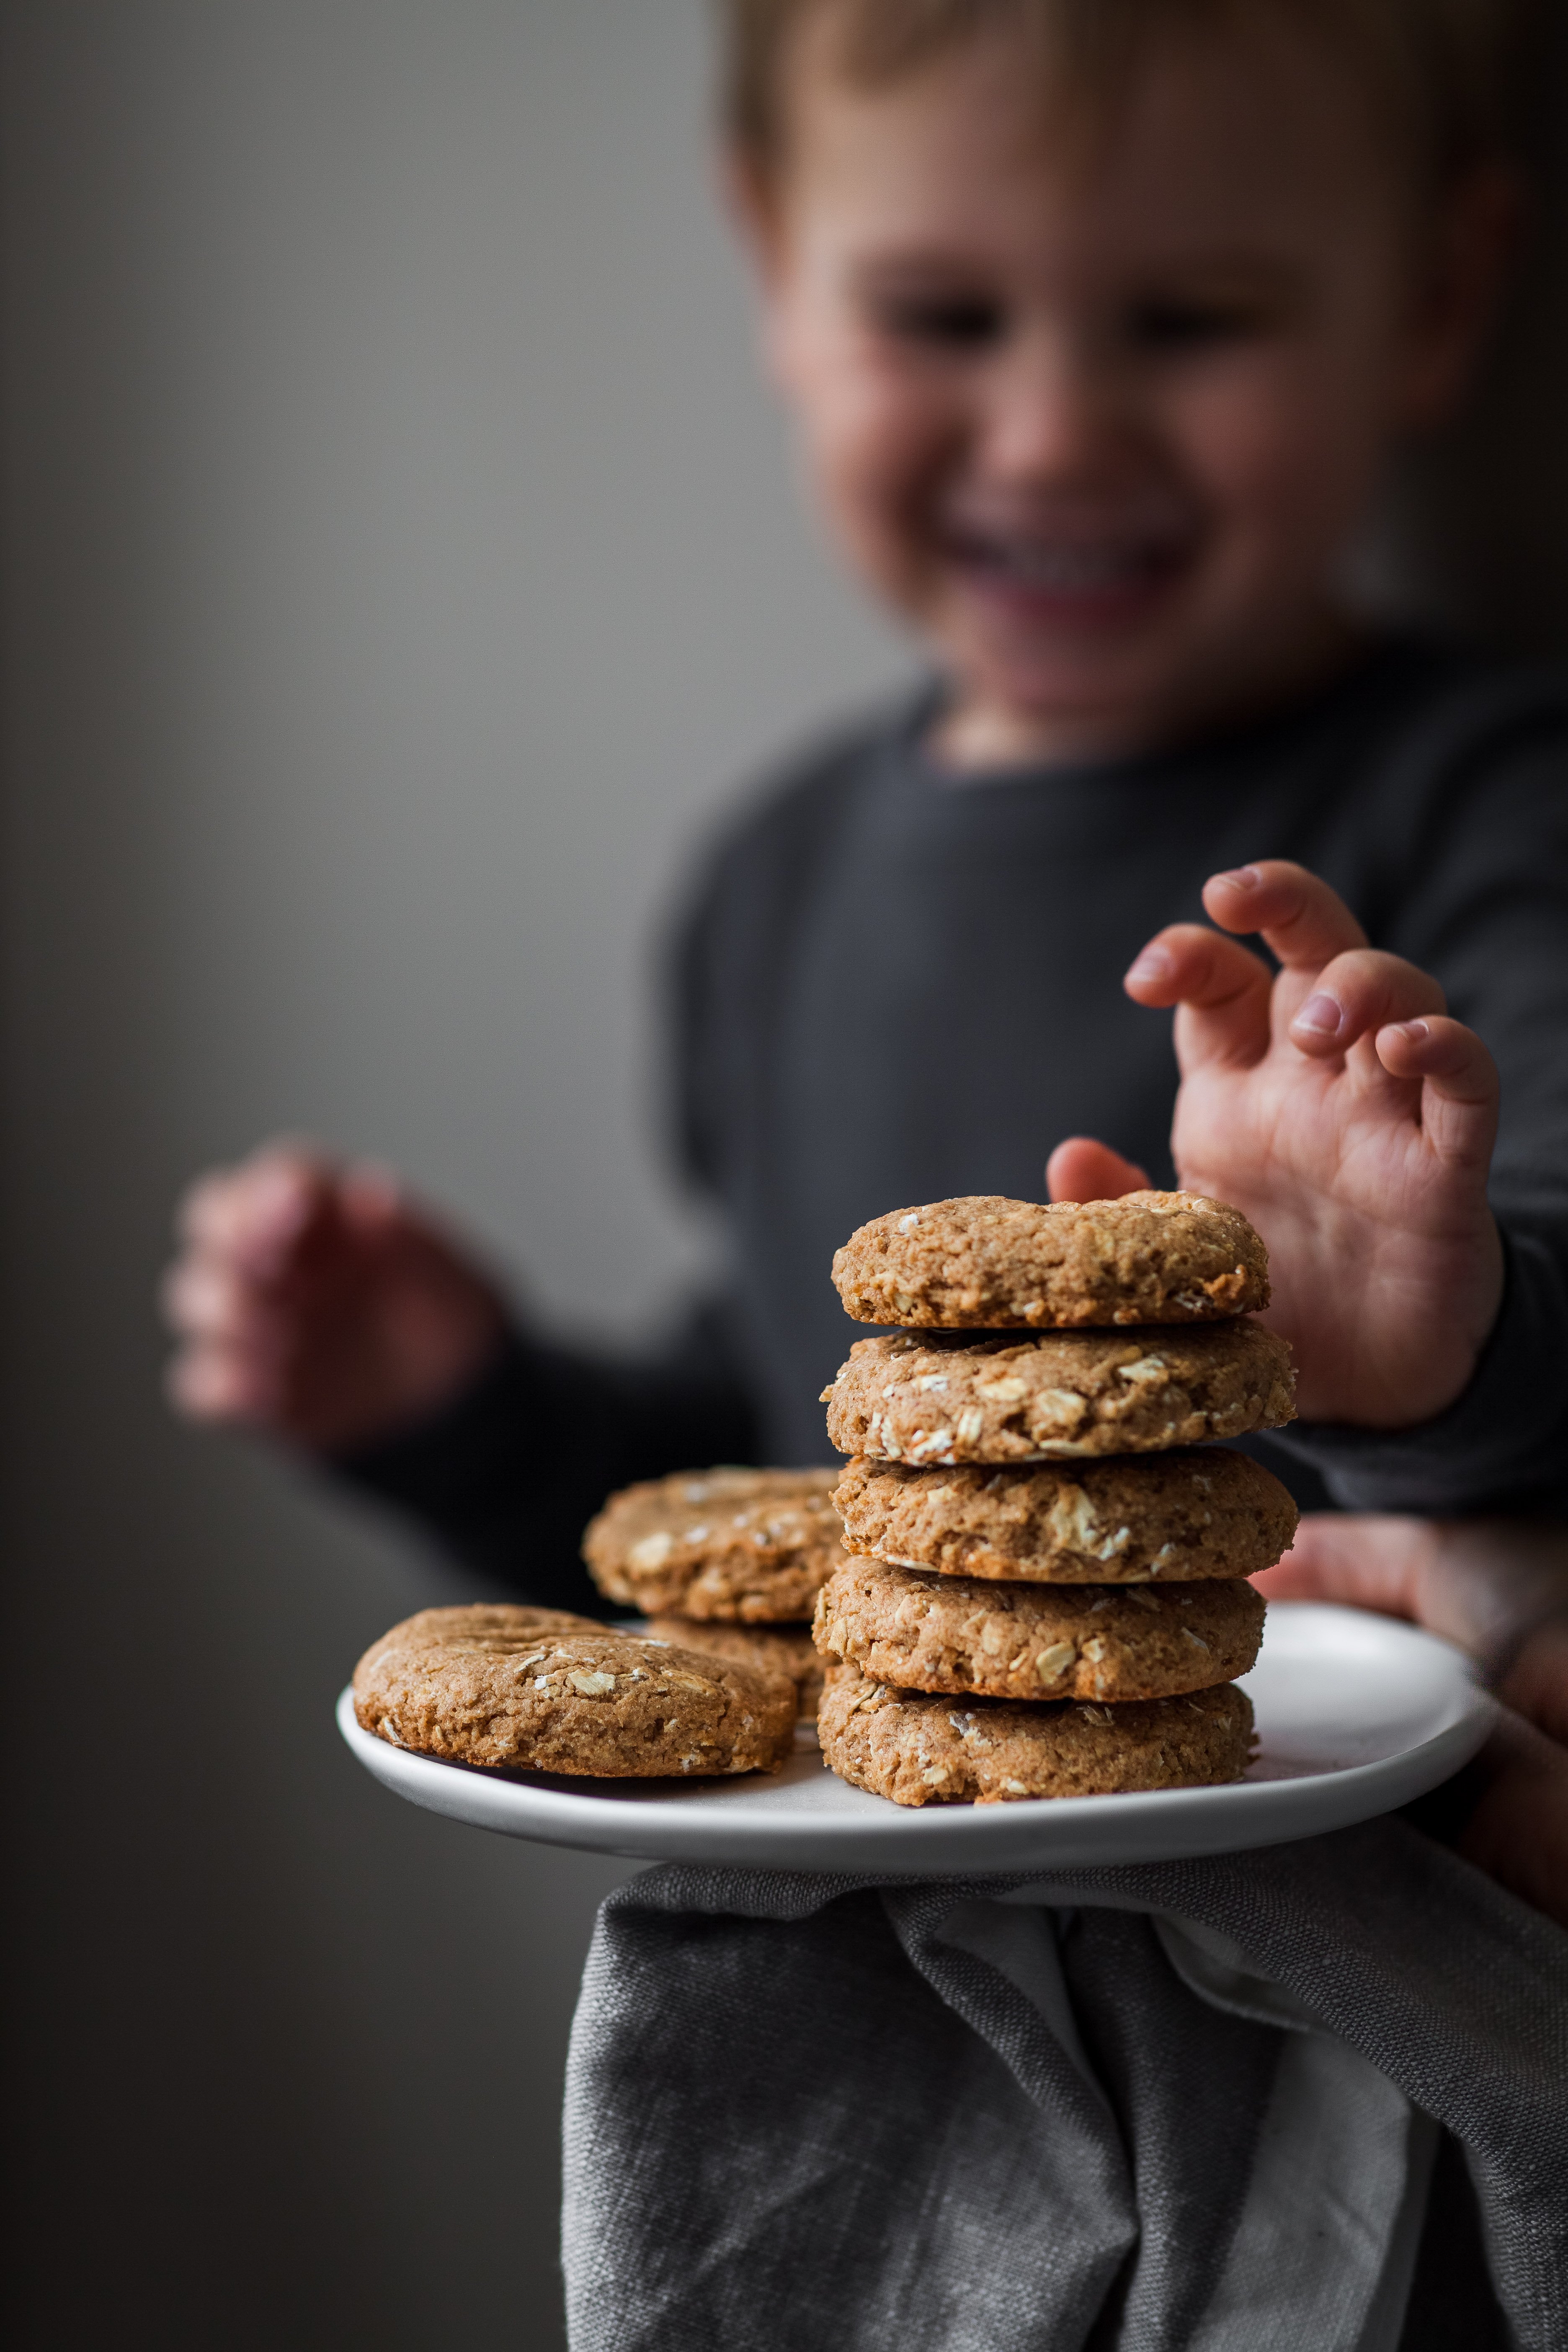 a small child reaching for a peanut butter oatmeal cookie on a plate.